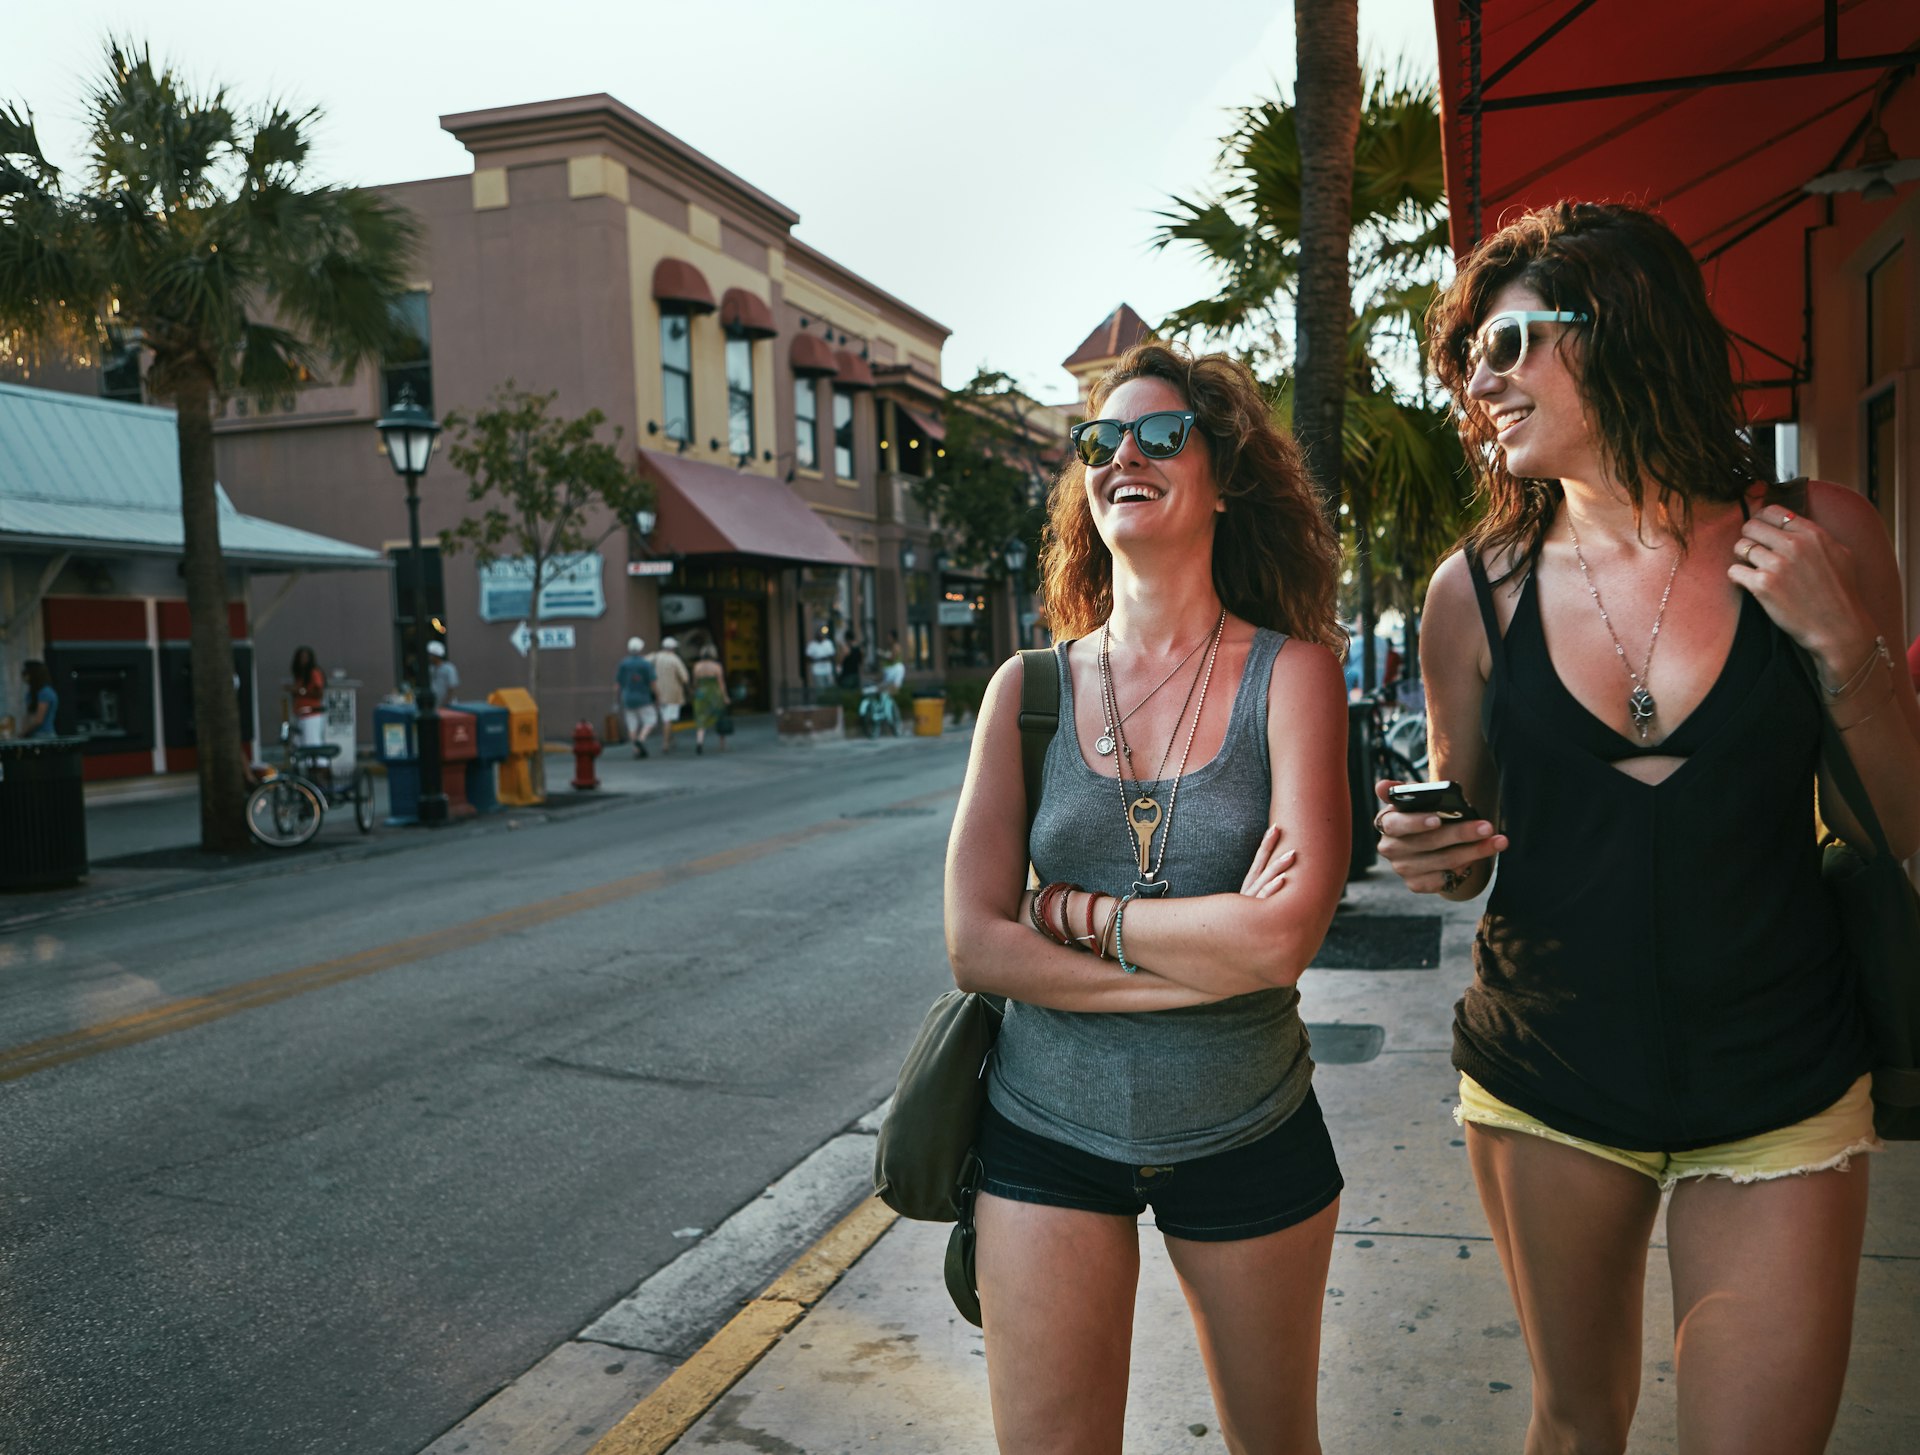 Two women laugh together while walking down a street in Key West